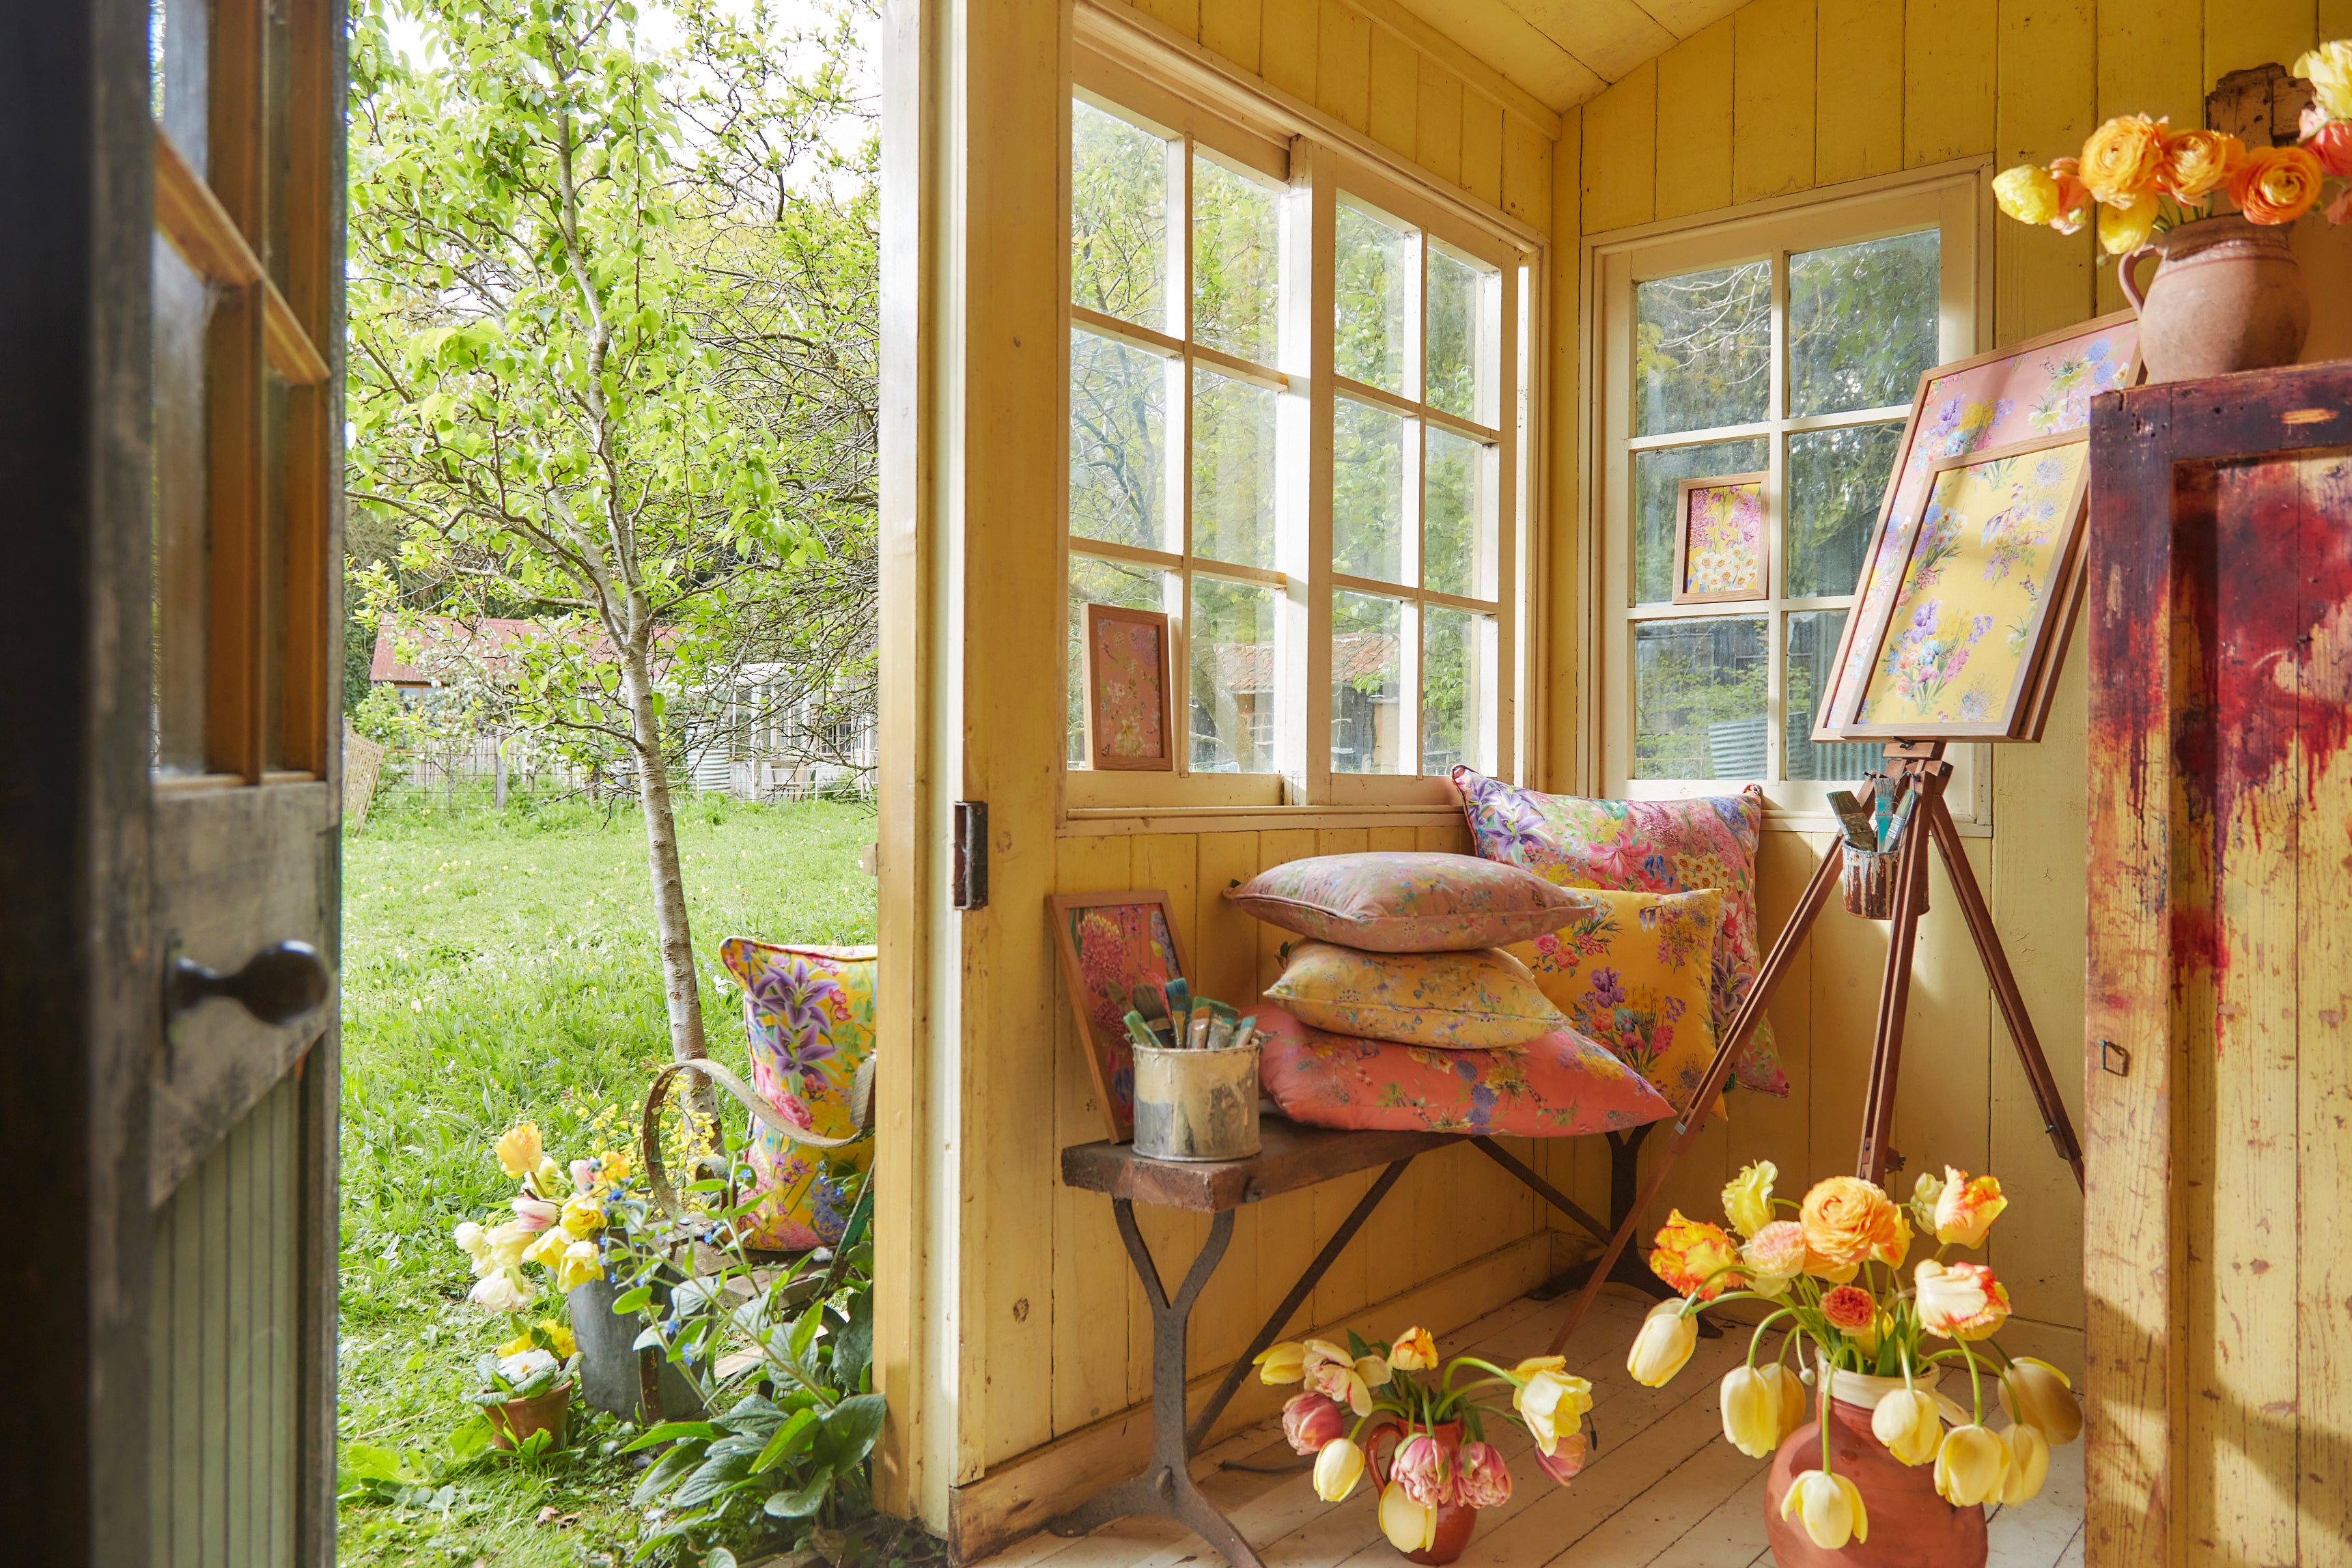 positive spaces created in outside sheds and outbuildings with luxury floral wallpaper, cushions and flower arrangements.